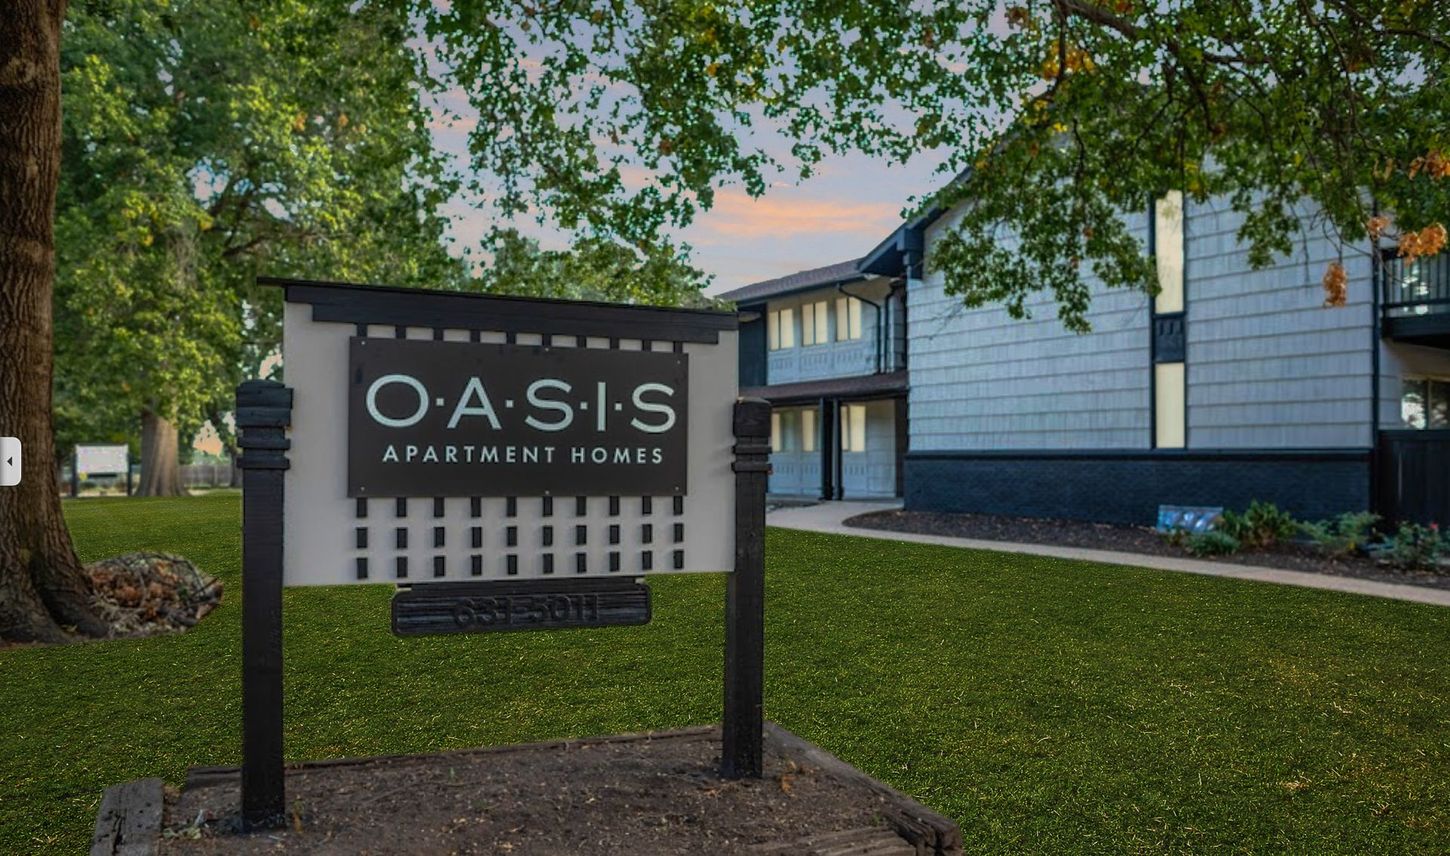 a sign for oasis apartment homes with an arrow pointing to the right